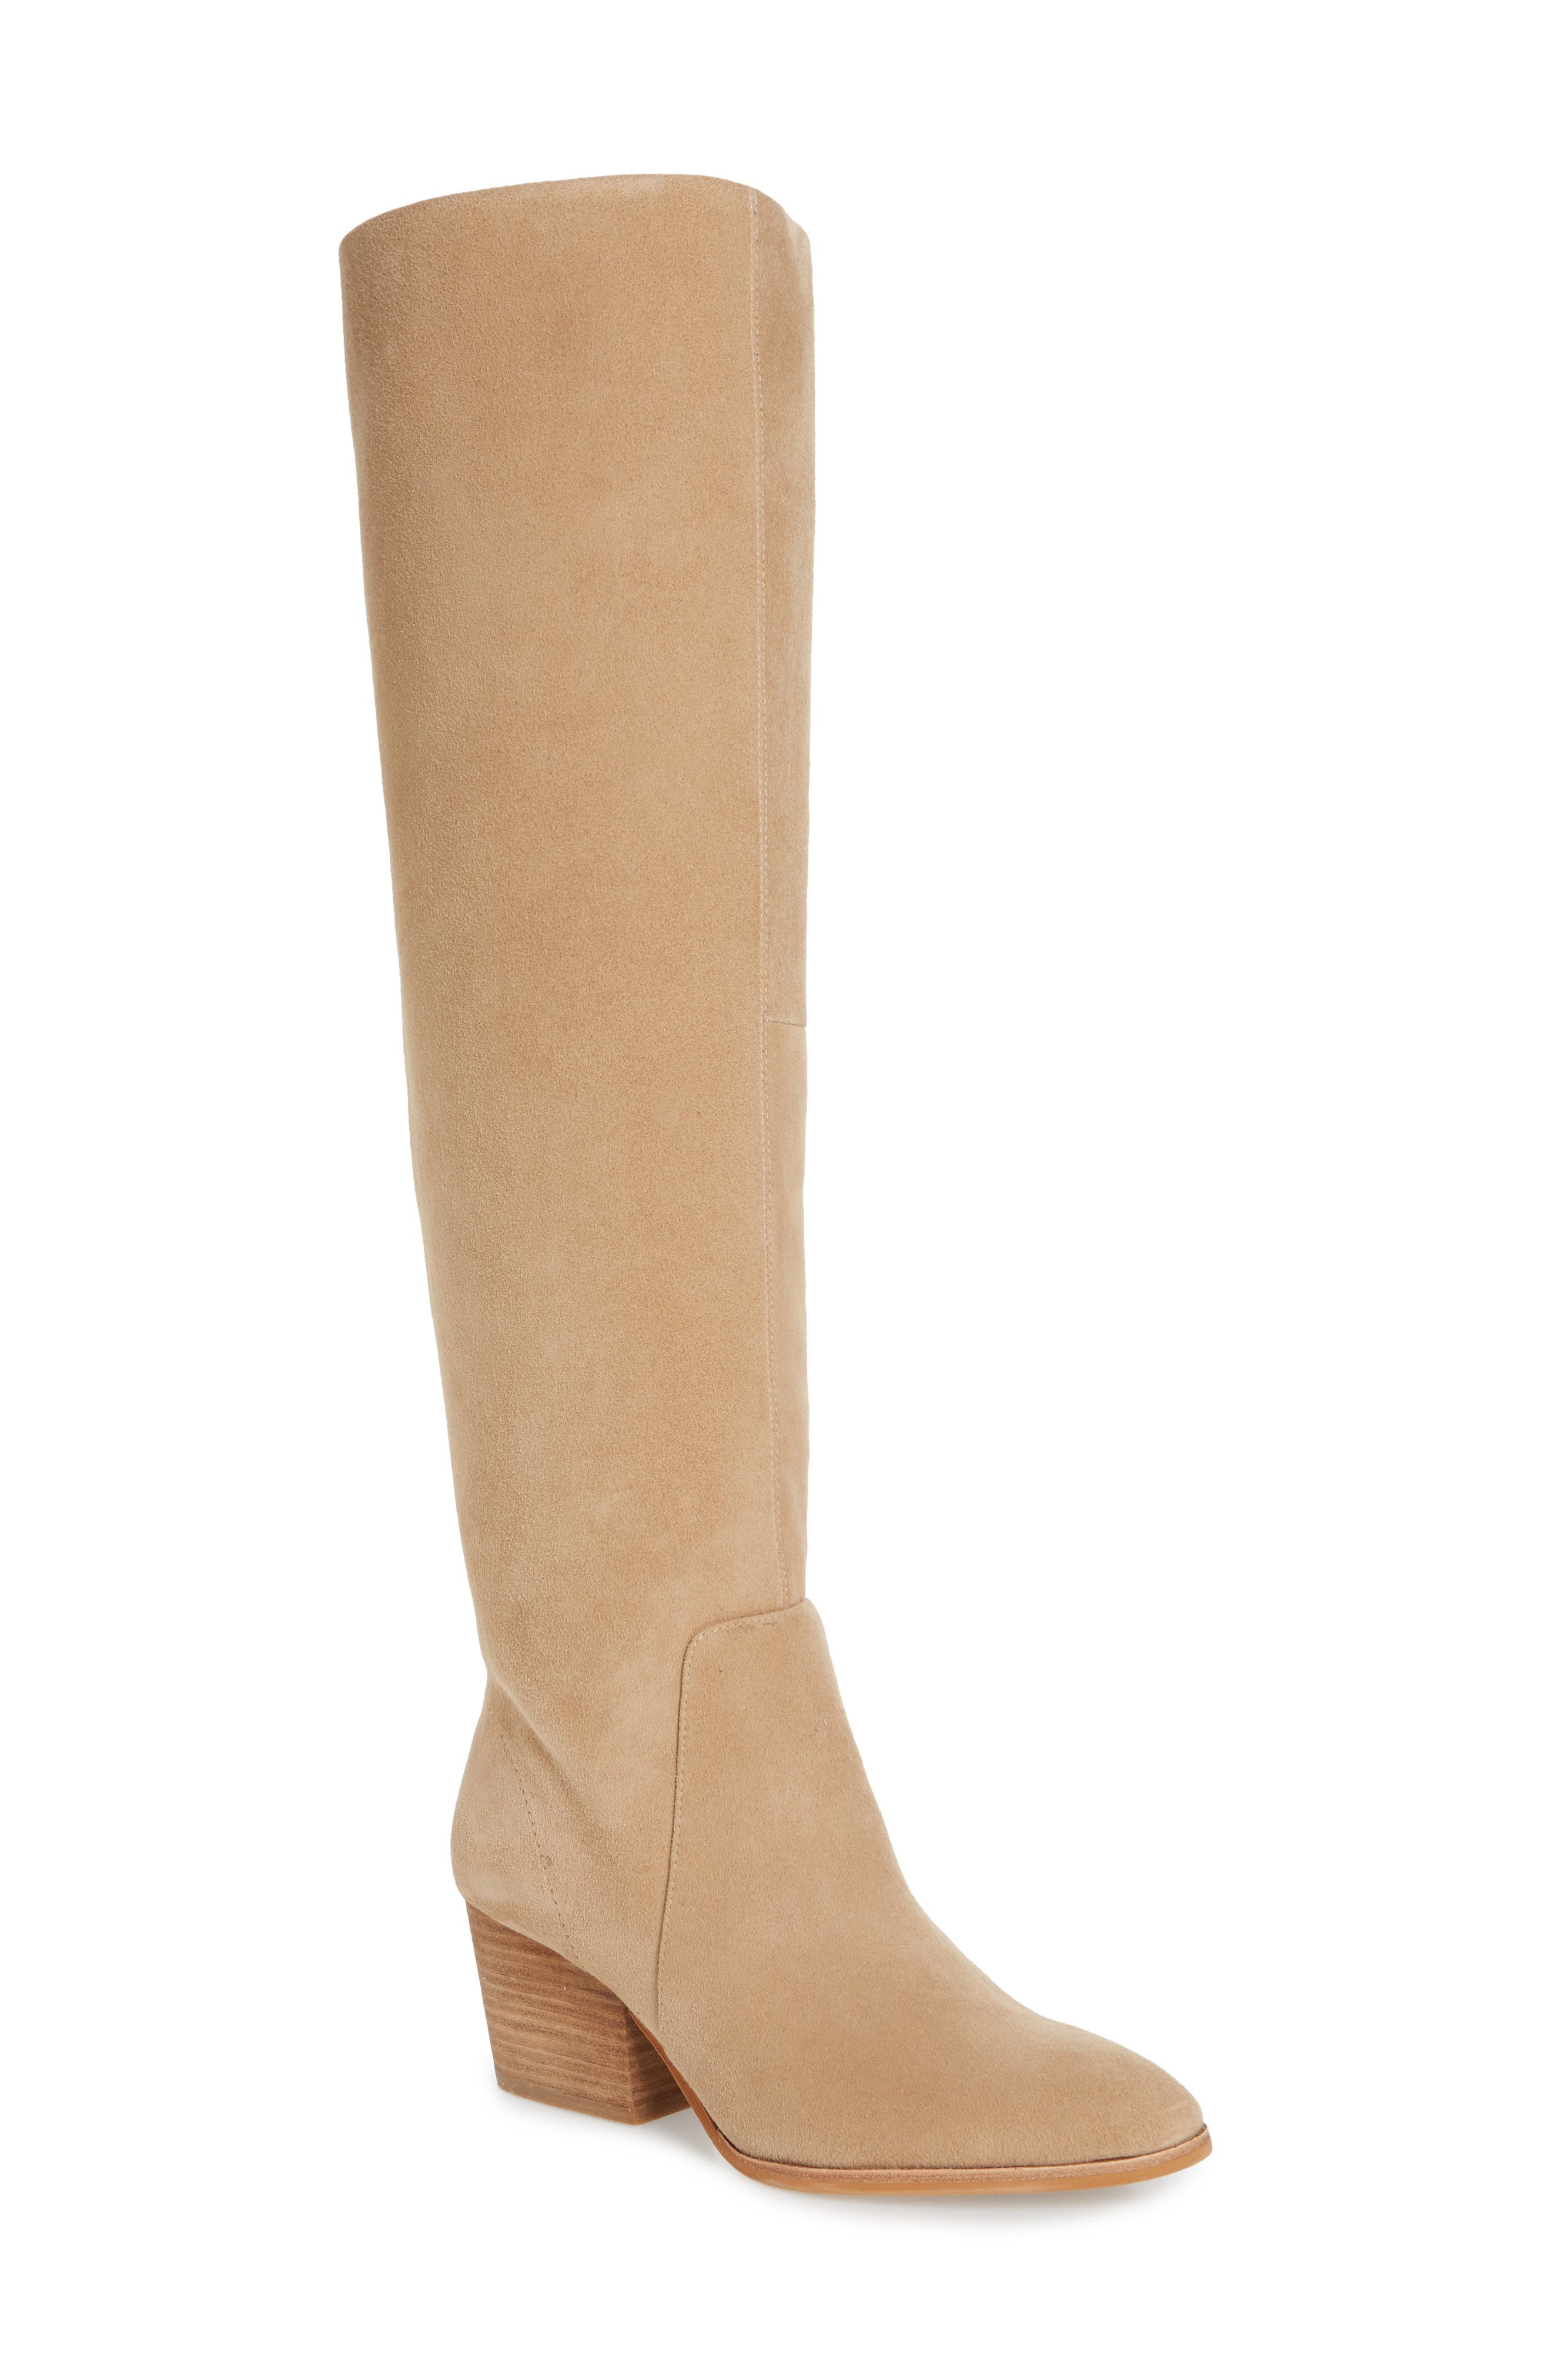 nestle knee high boot vince camuto